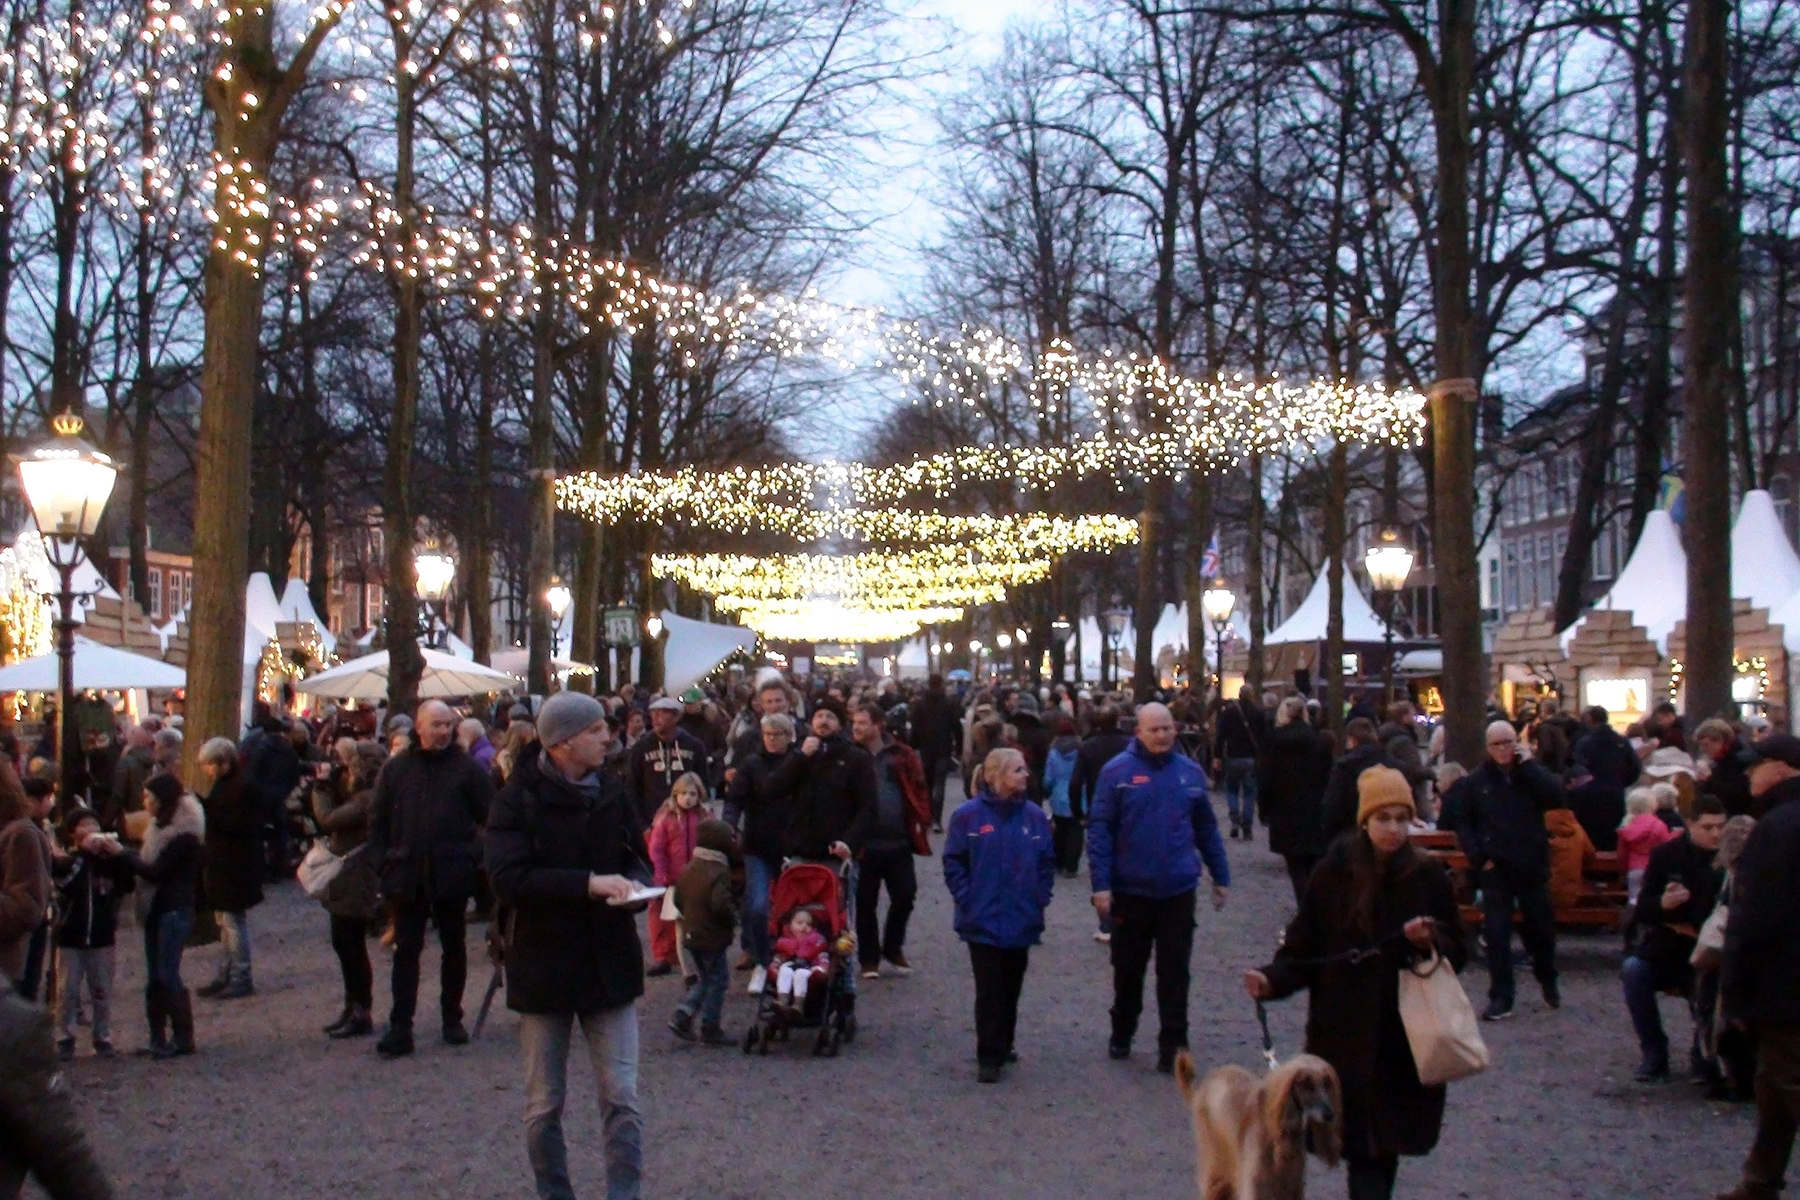 People shopping at the Royal Christmas Fair in The Hague